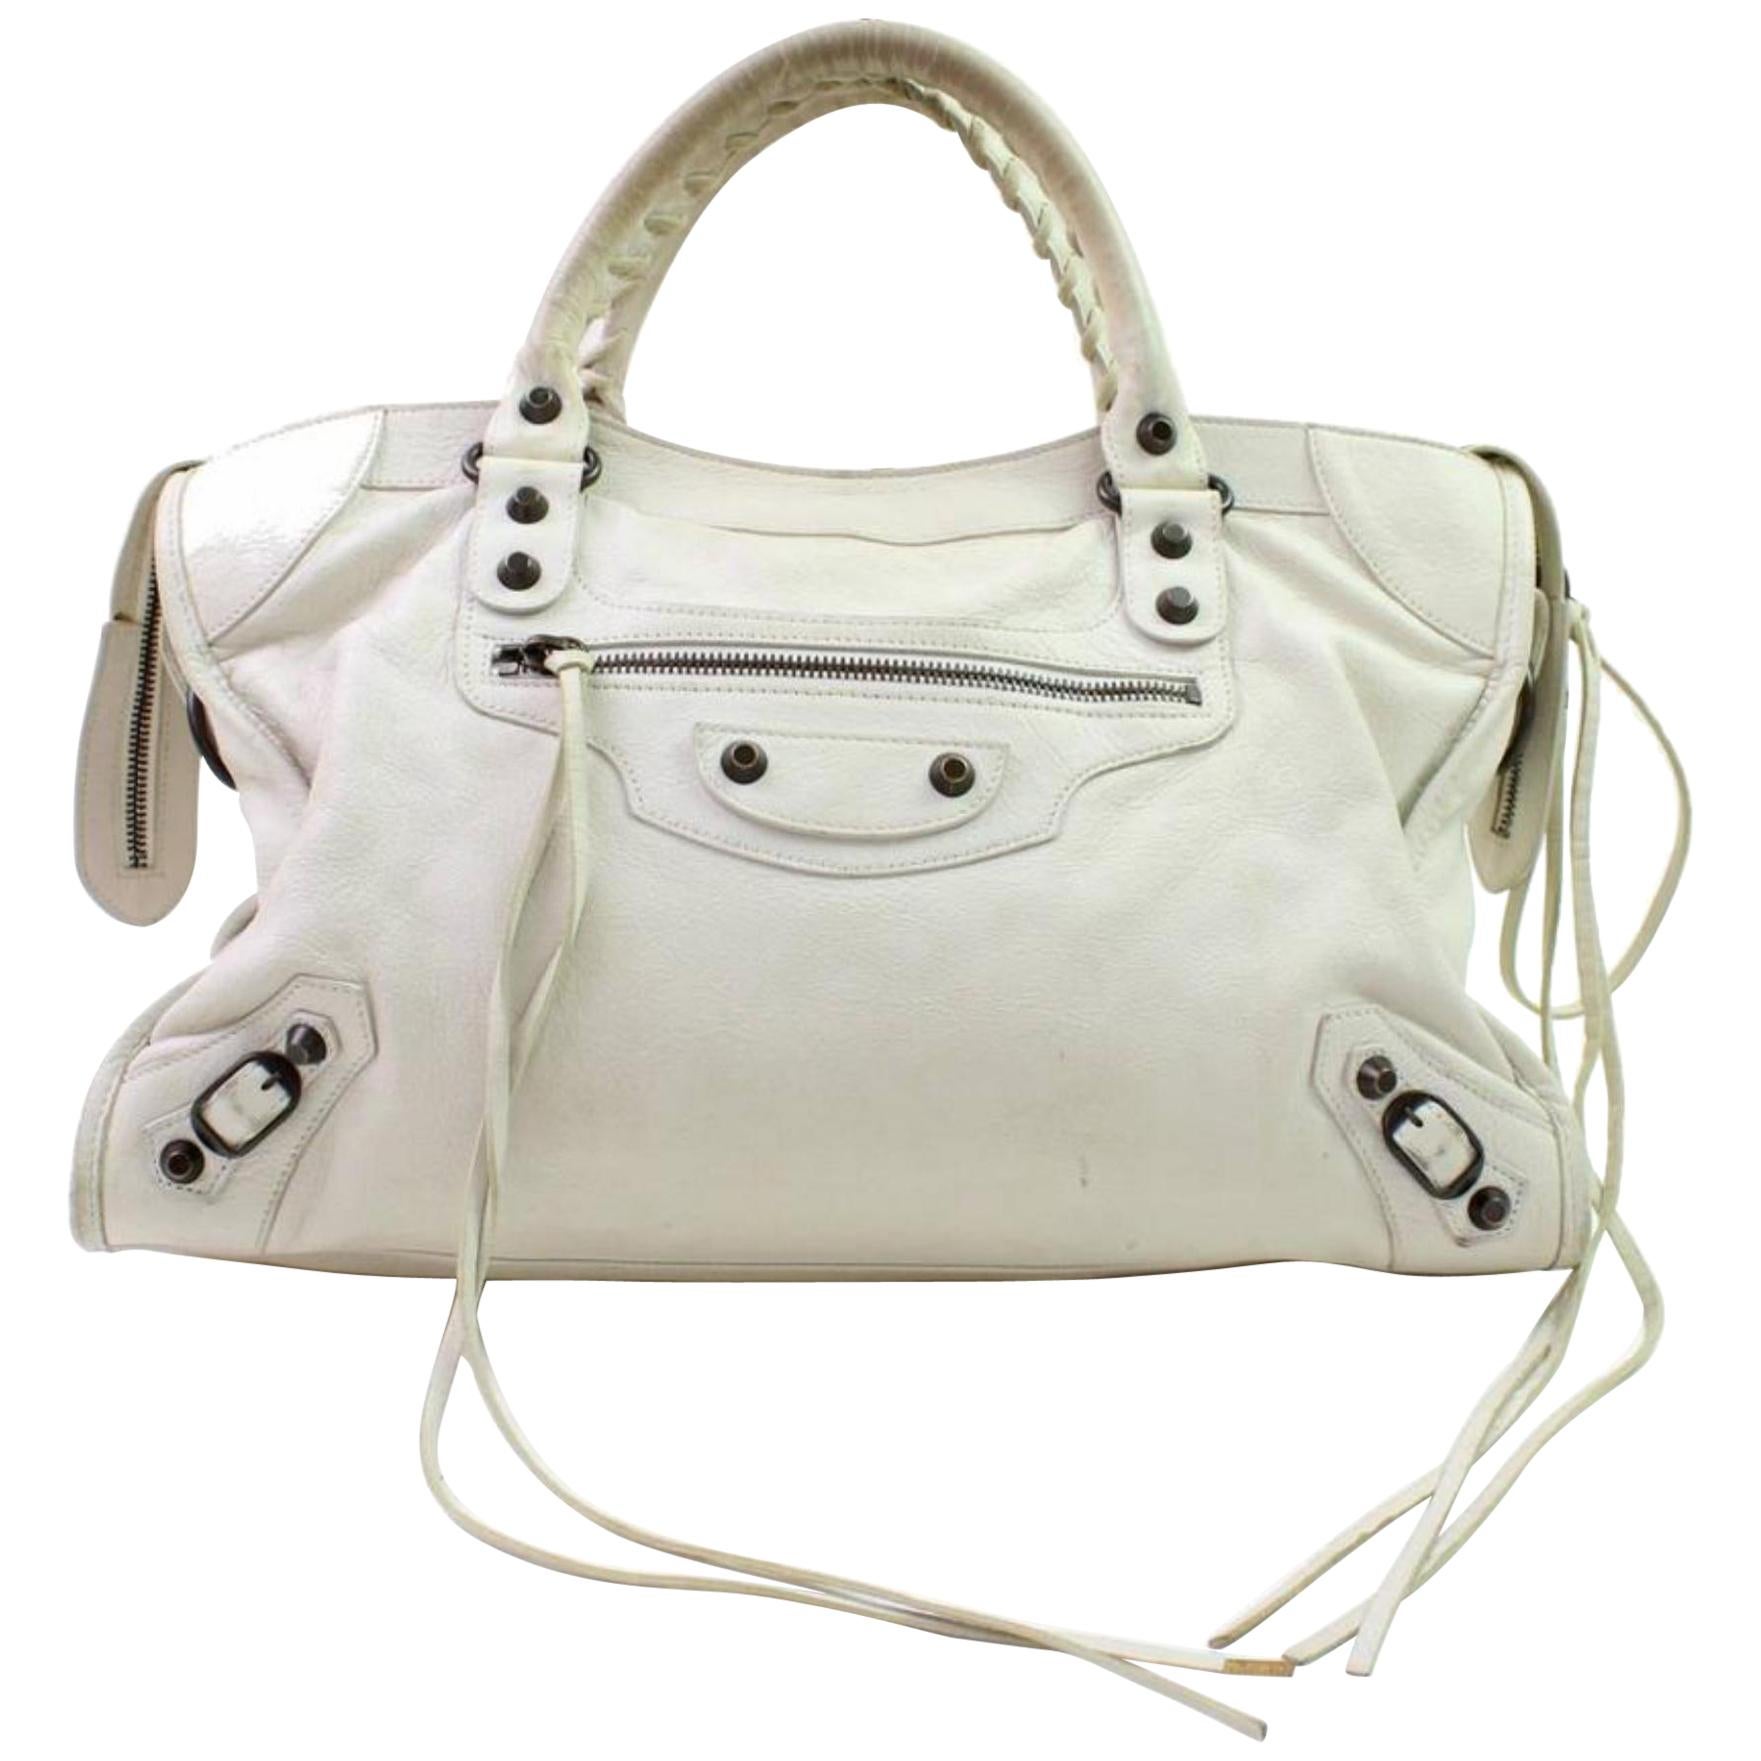 Balenciaga The City 866187 Ivory Leather Shoulder Bag For Sale